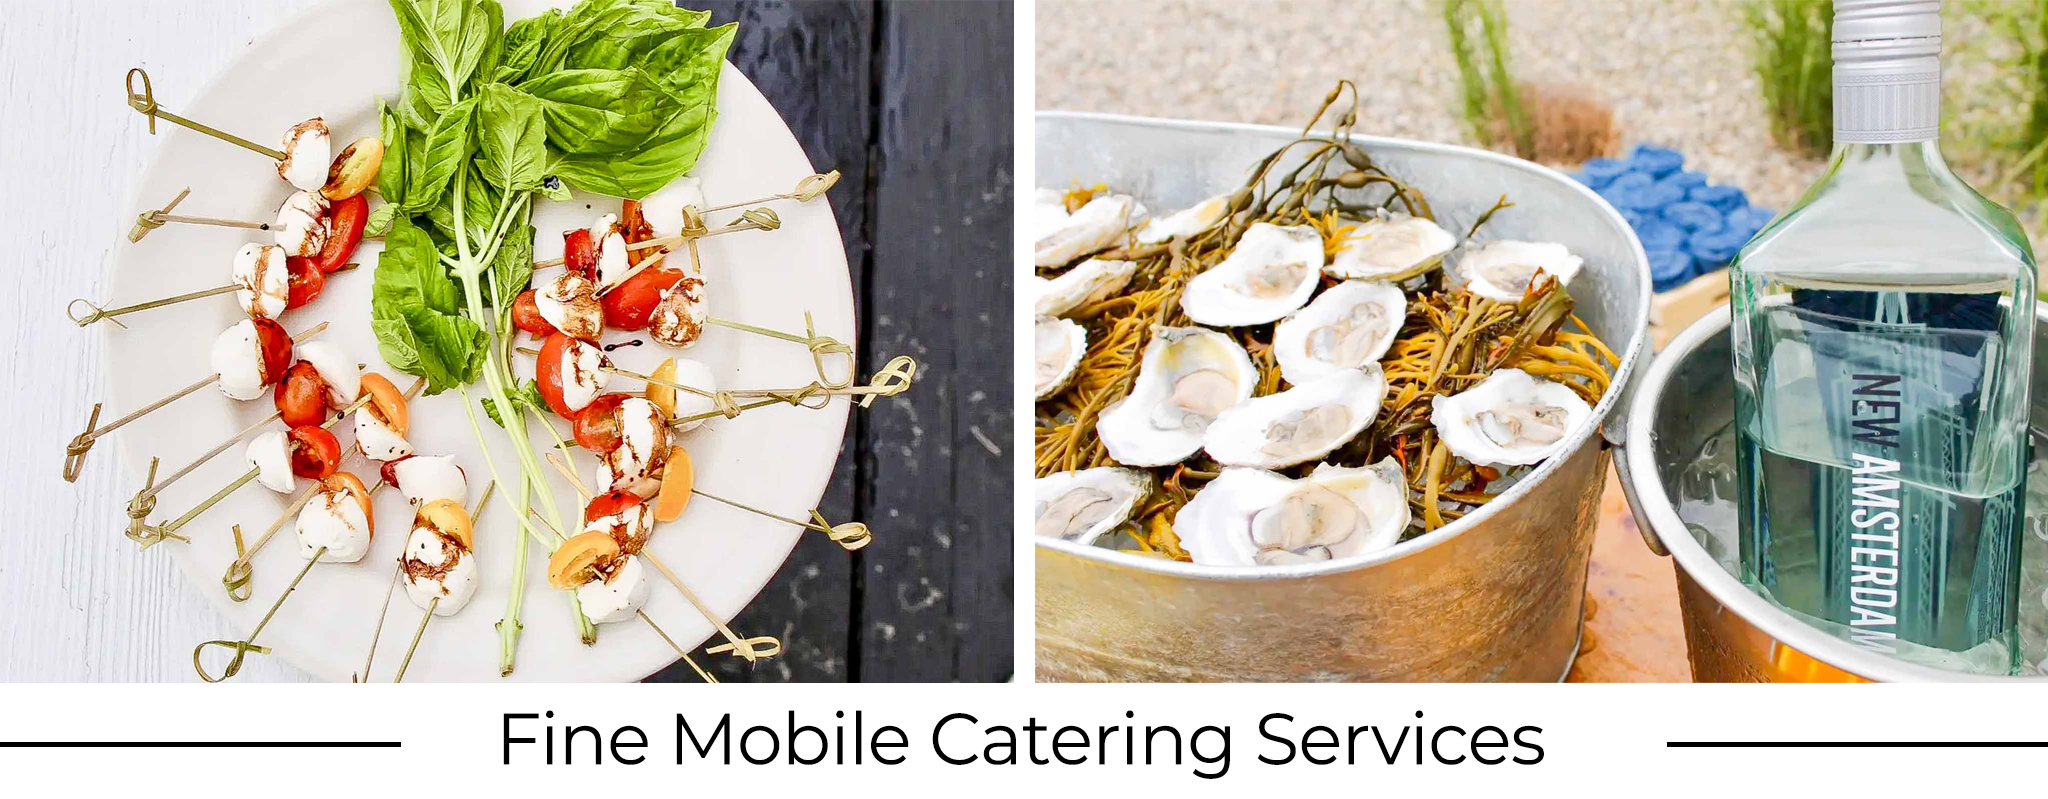 Mobile Catering